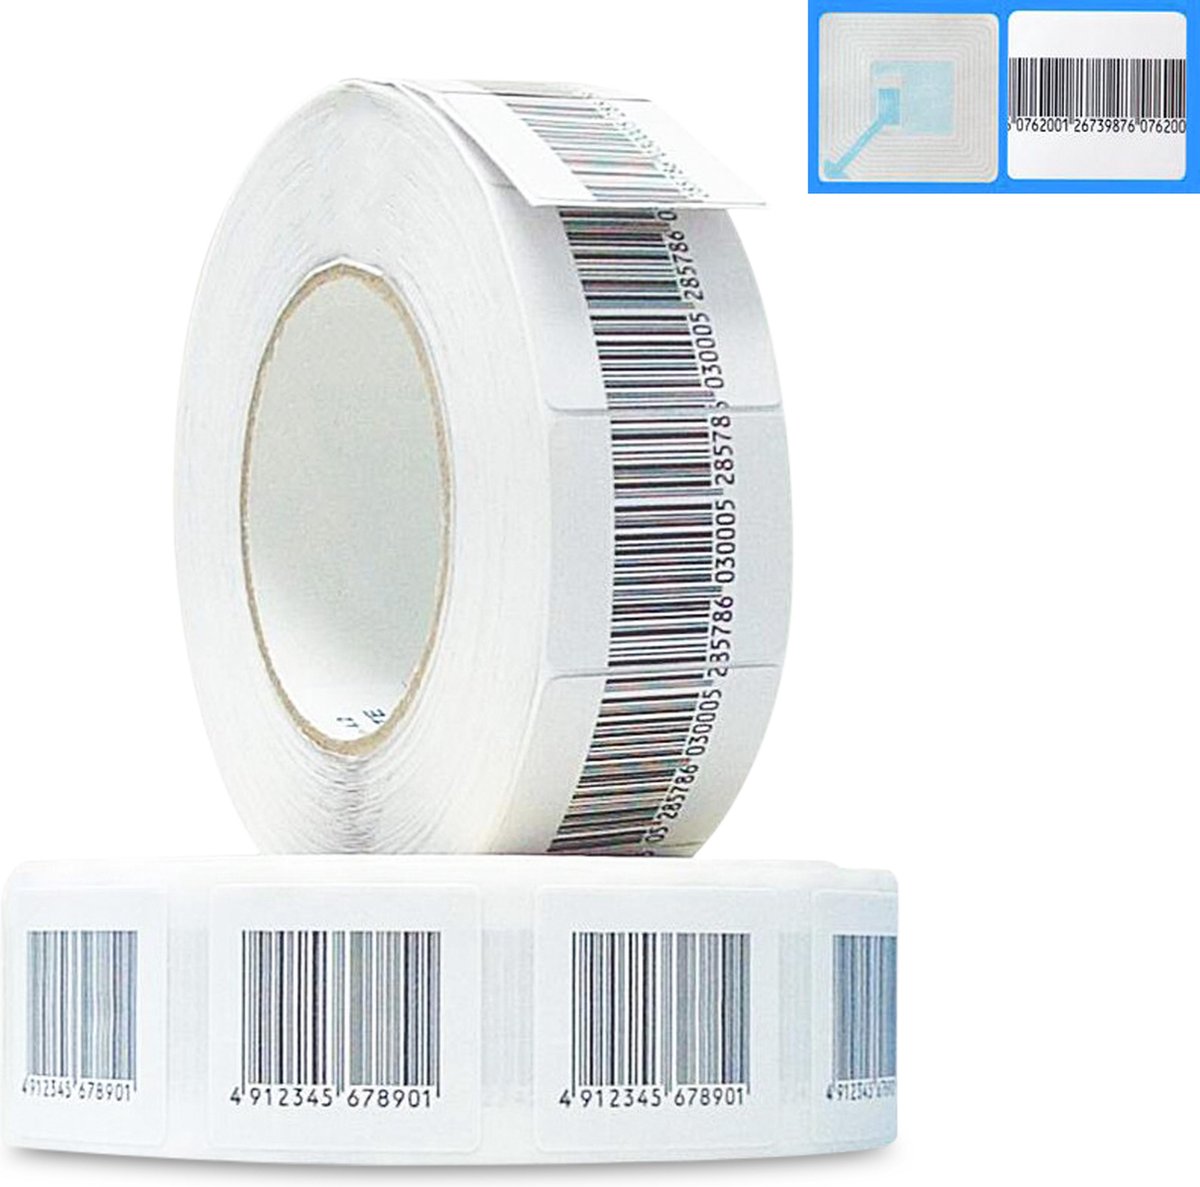 Barcode Stickerlabels EAS RF 8,2Mhz - 4 x 4 cm - 1000 Stickers